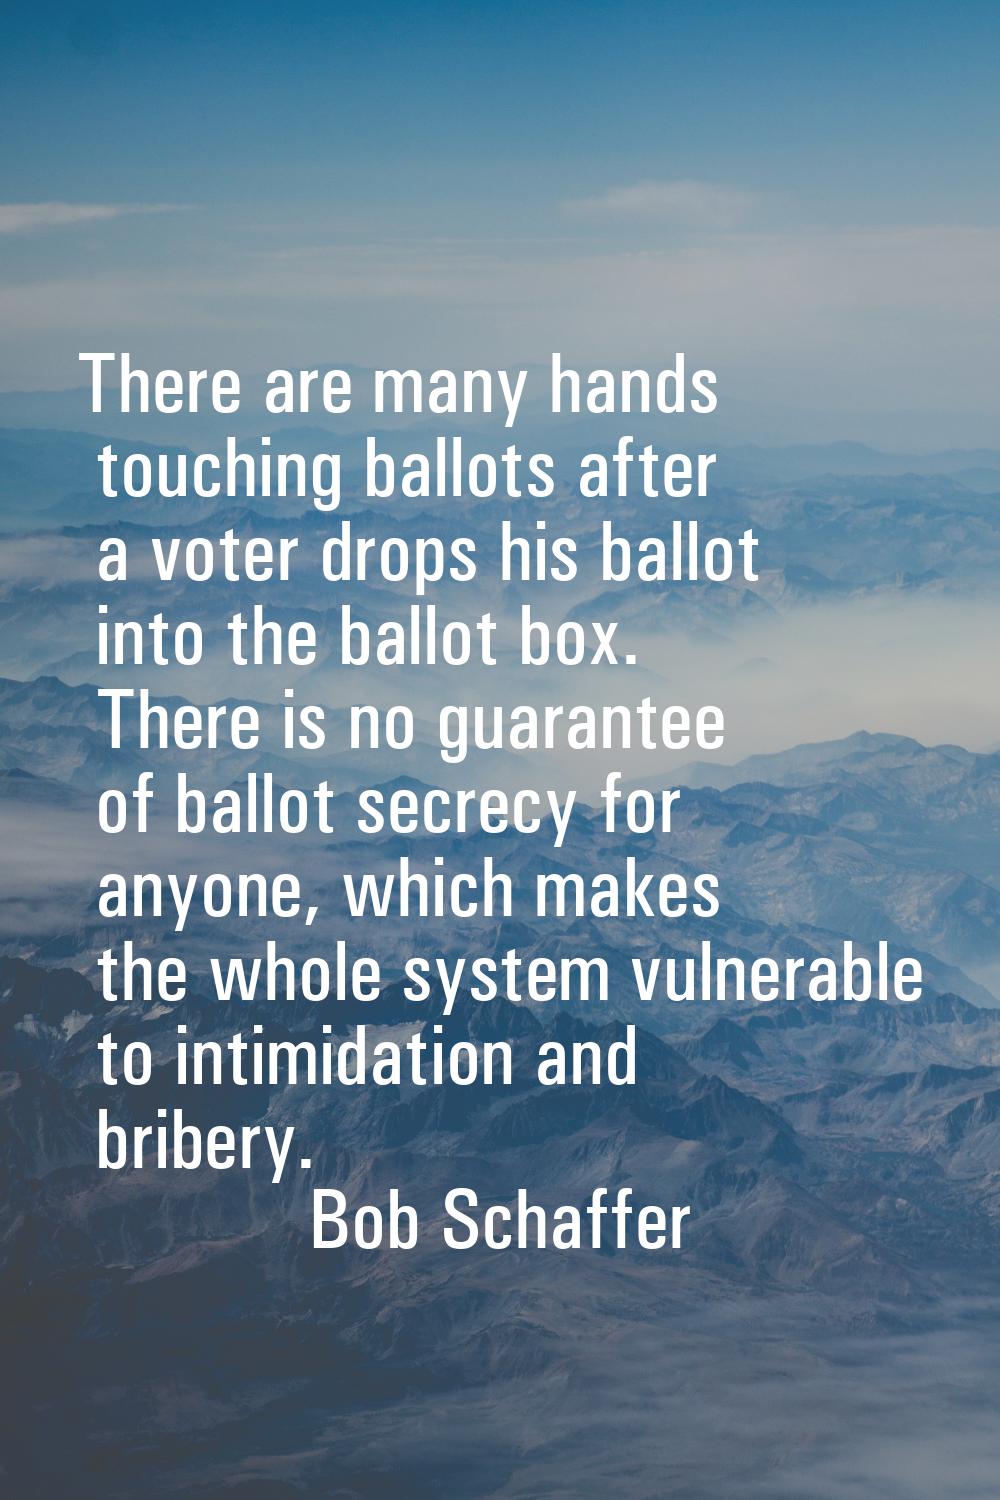 There are many hands touching ballots after a voter drops his ballot into the ballot box. There is 